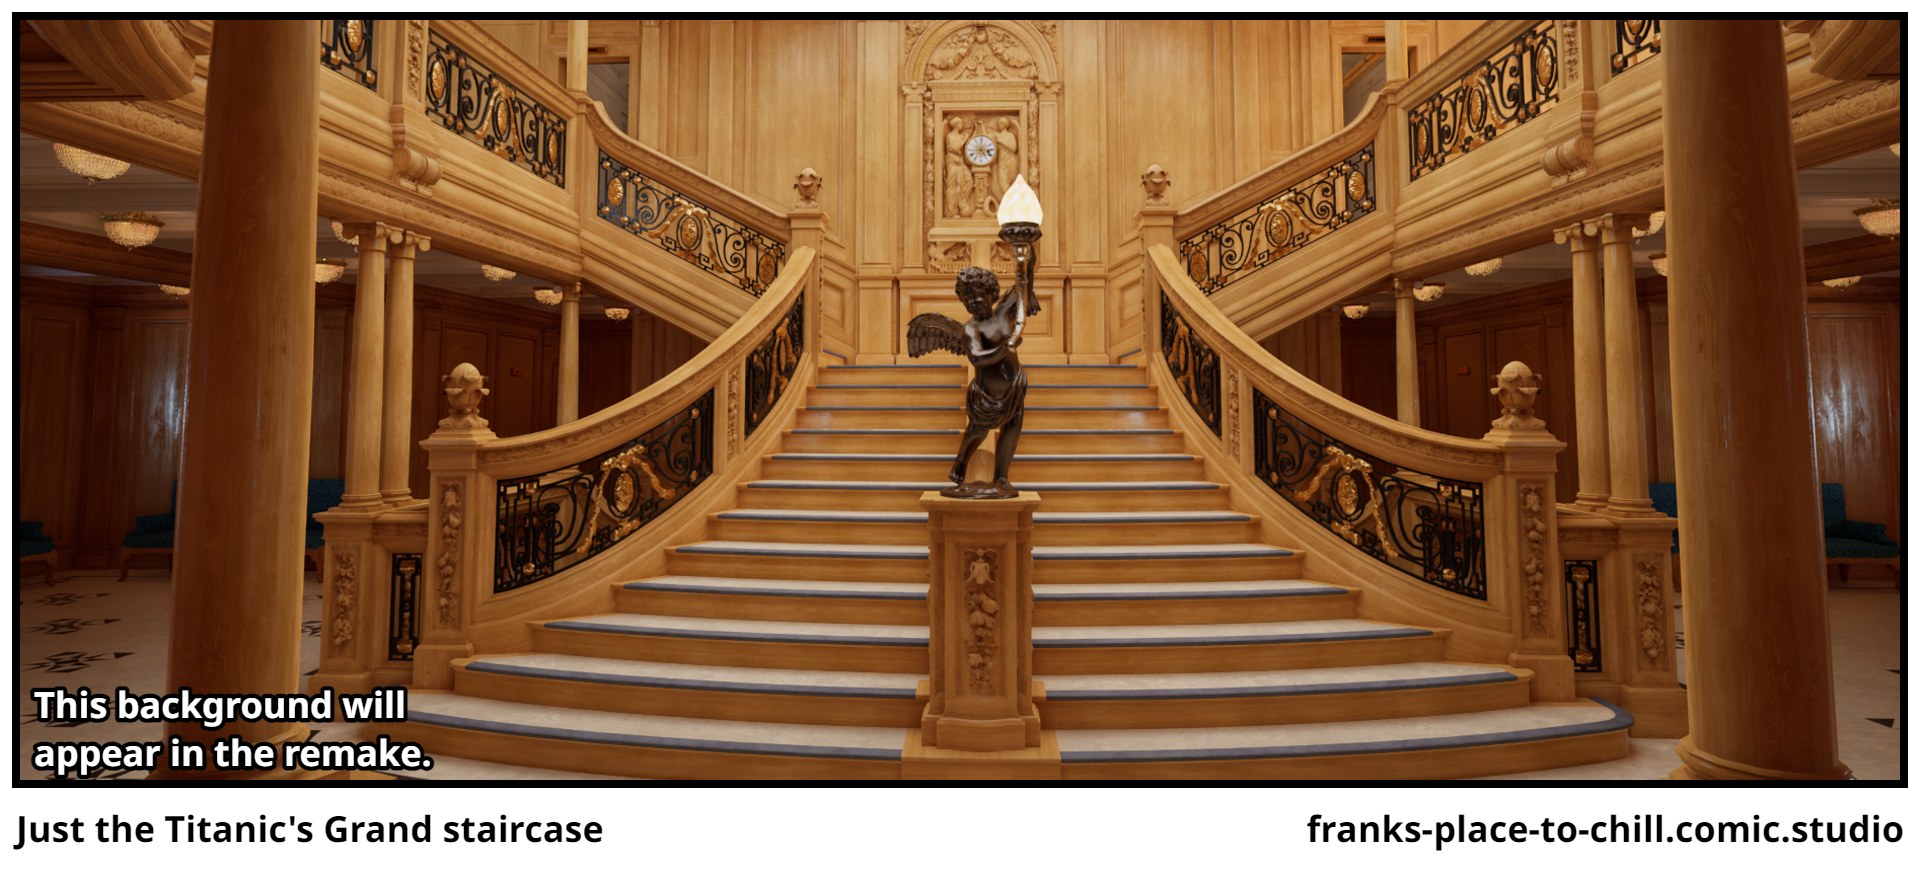 Just the Titanic's Grand staircase